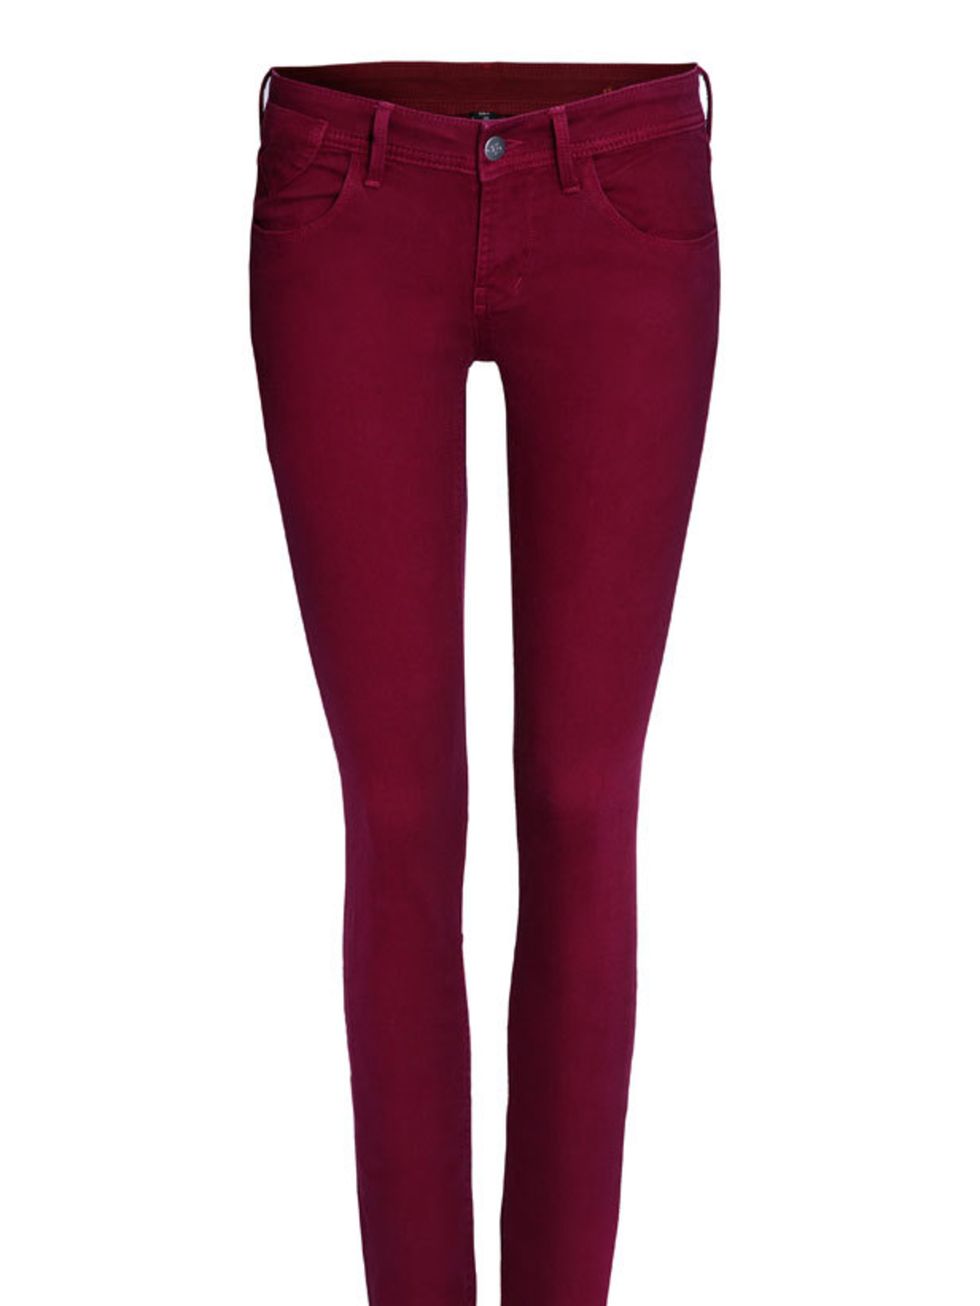 <p>Tap into the colour trend of the season with these burgundy BBS jeans. Team with a statement knit and your weekend winter look is sorted <a href="http://www.bbsjeans.com/">BBS</a> burgundy jeans, £55</p>